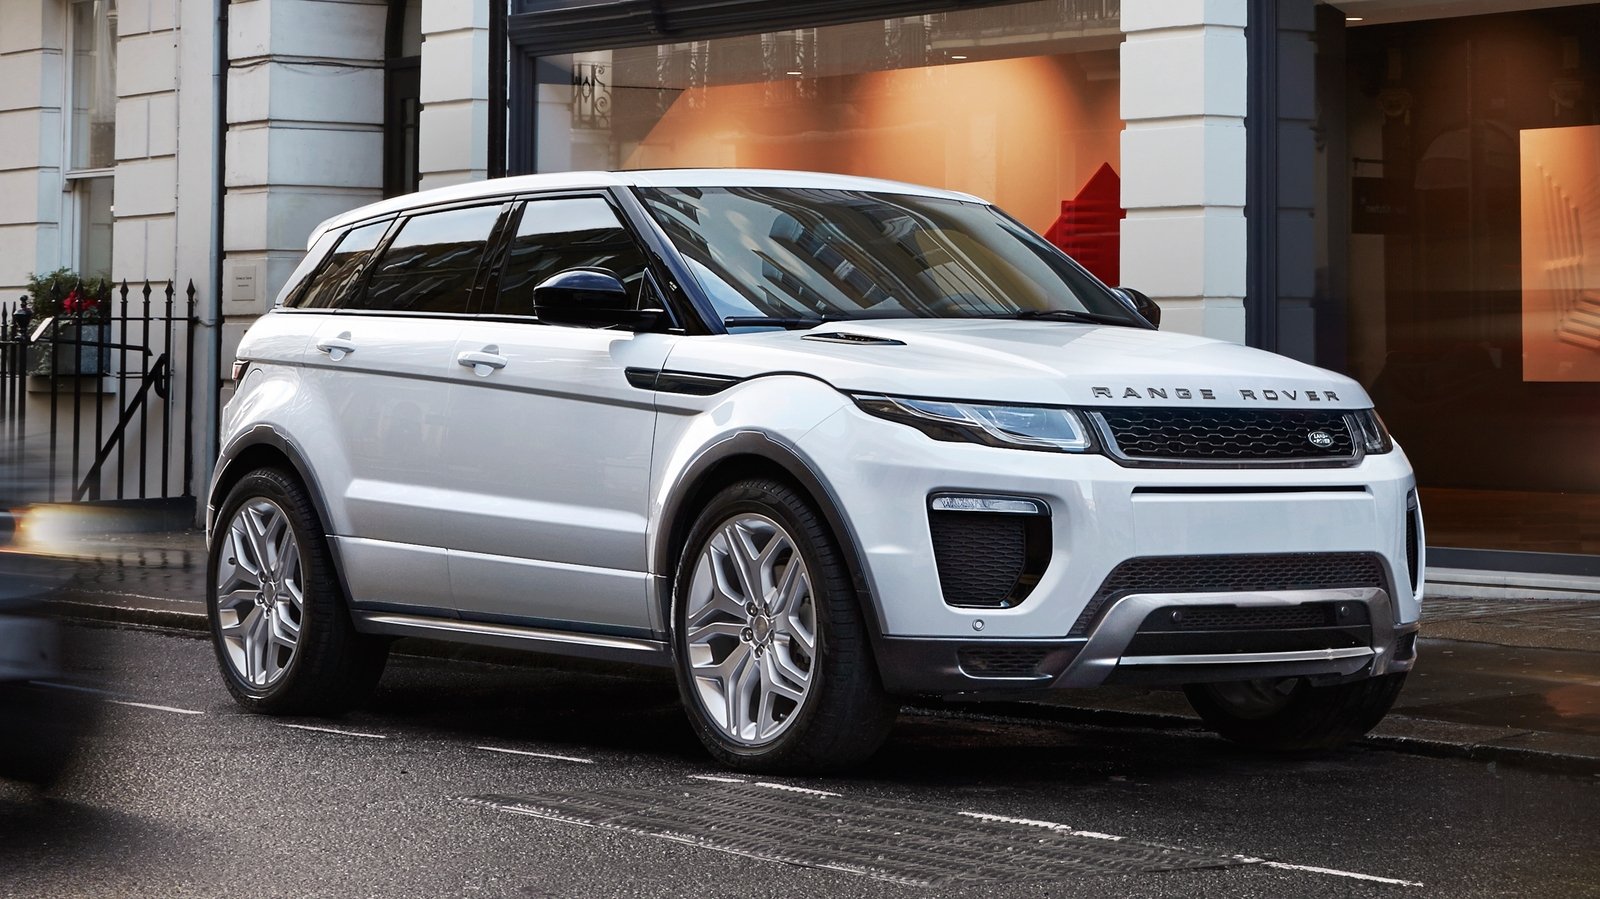 Updated 2017 JLR Range Rover Evoque India Front Side Profile